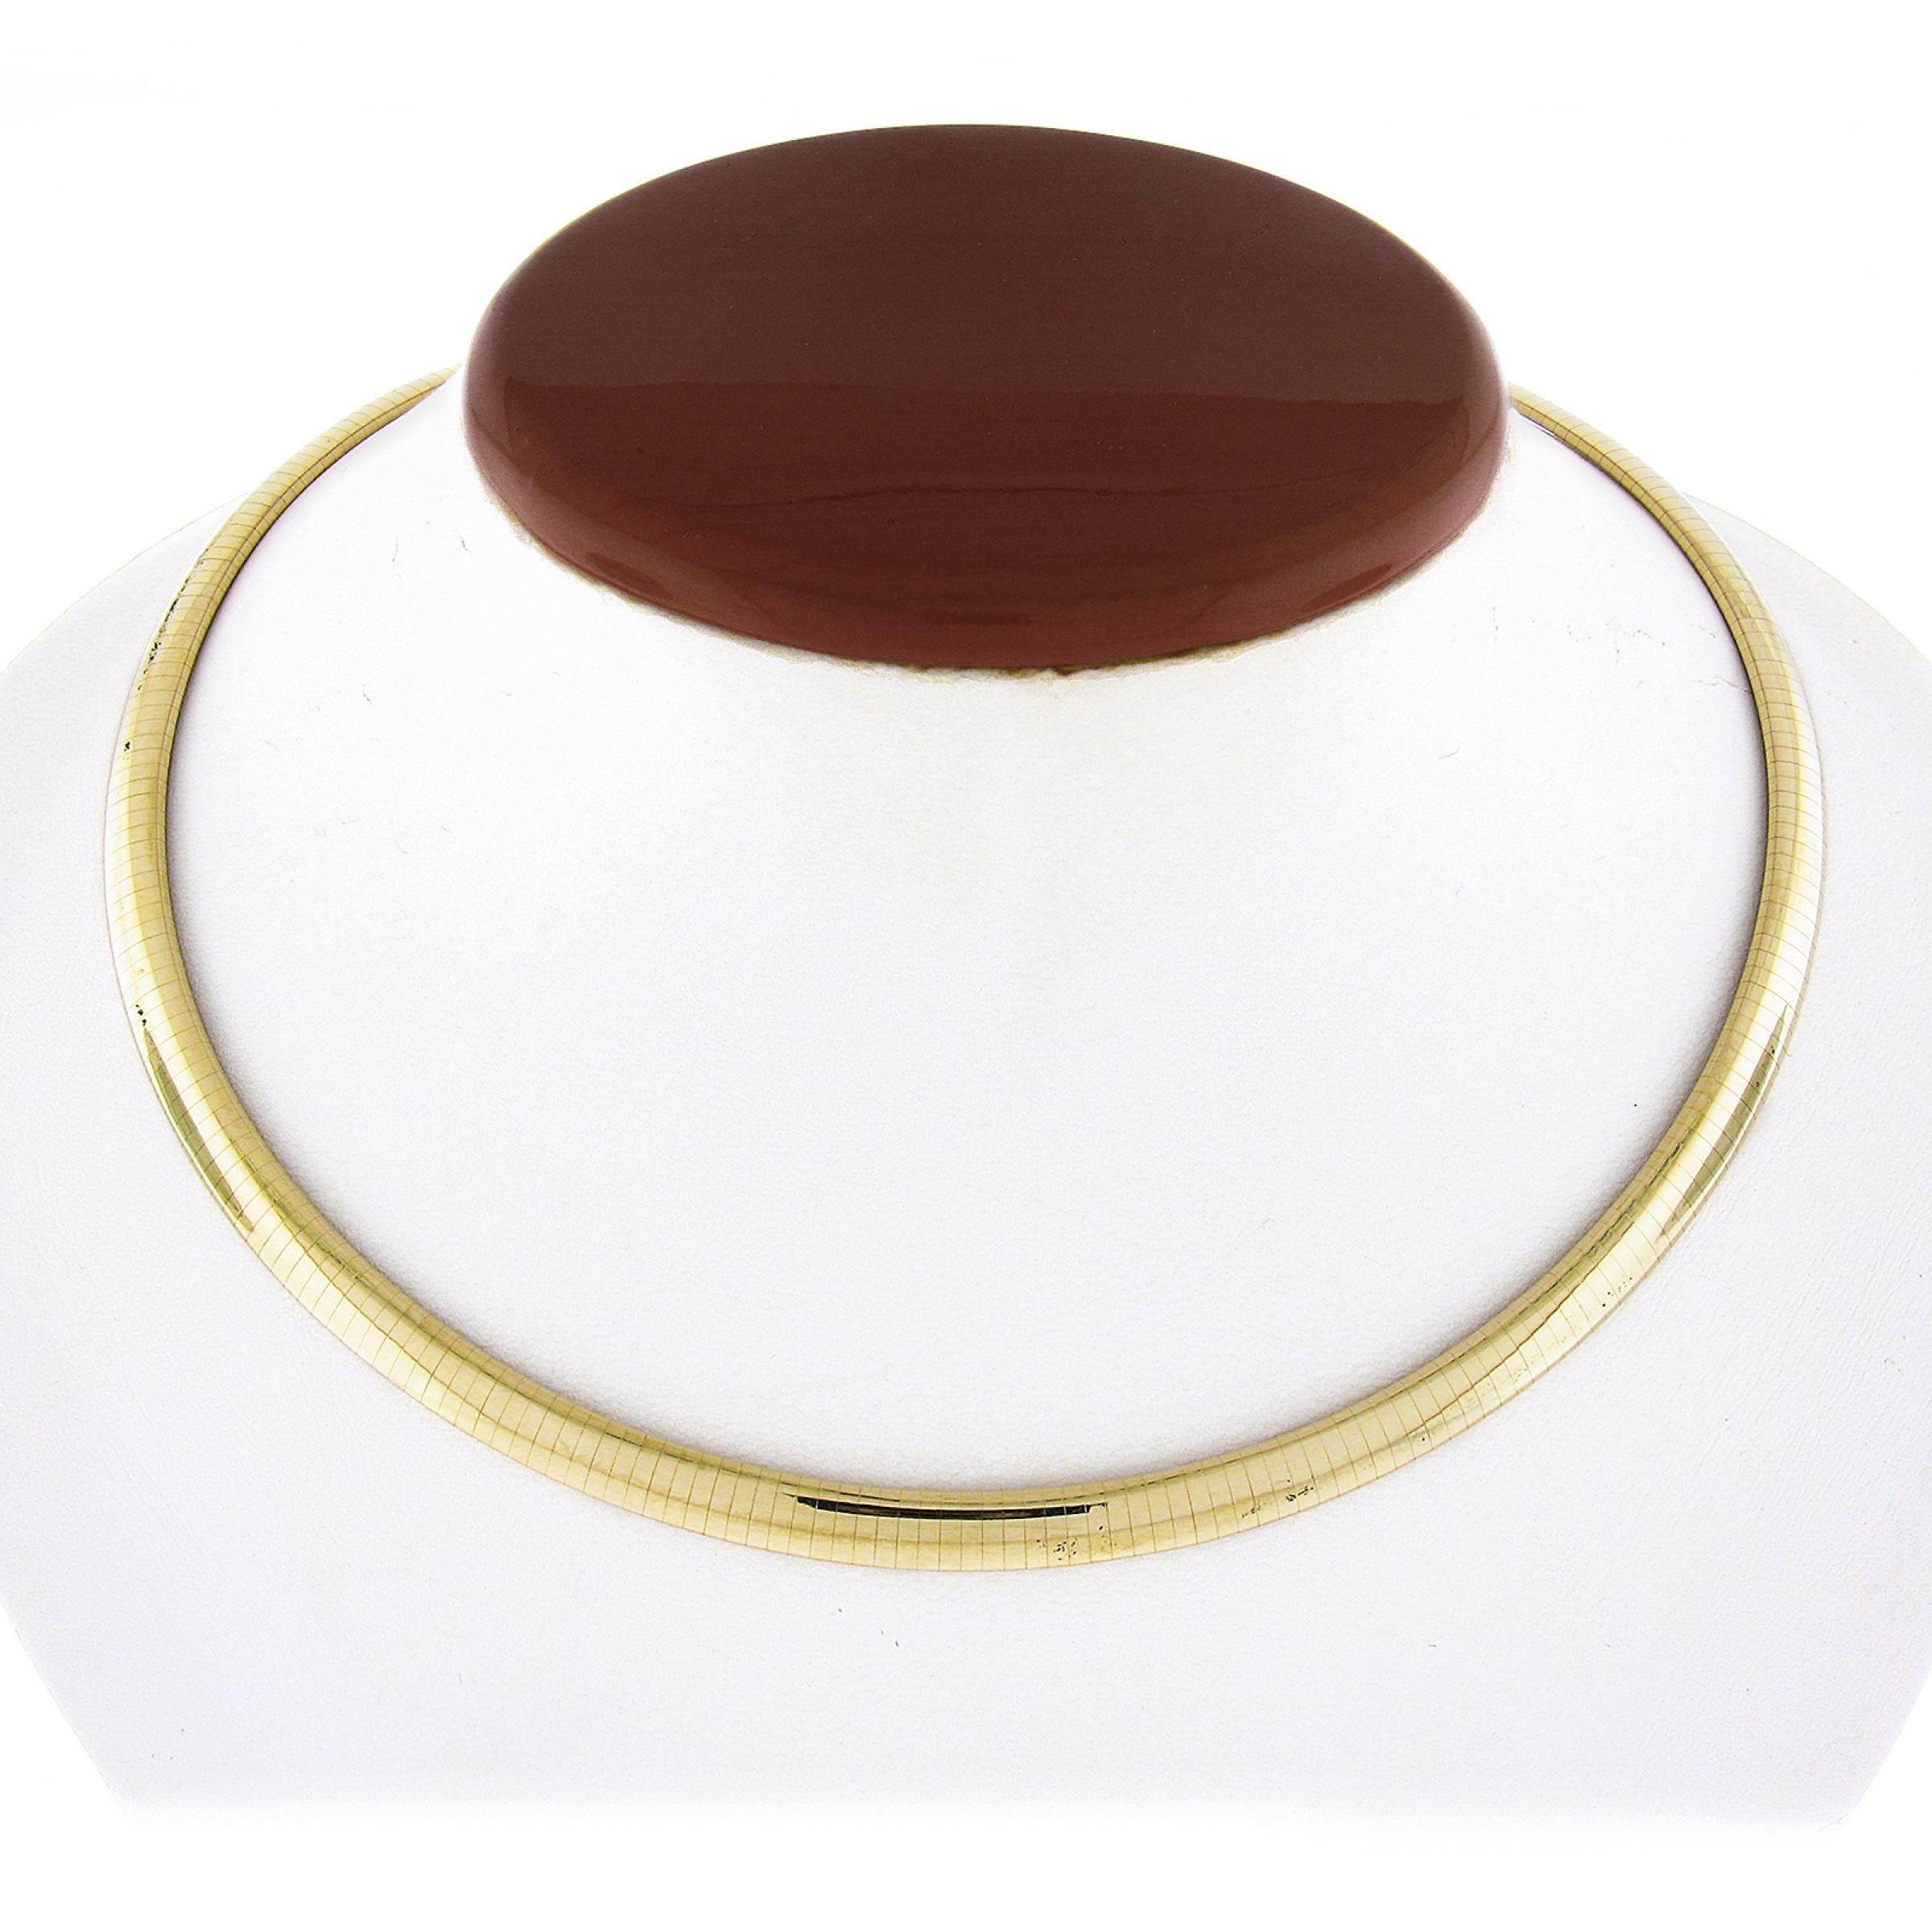 Here we have a fancy and very well made omega link collar choker necklace that was crafted from solid 14k yellow gold. This beautiful necklace measures 6mm wide and has a slightly domed surface with a wonderful high-polished finish throughout giving